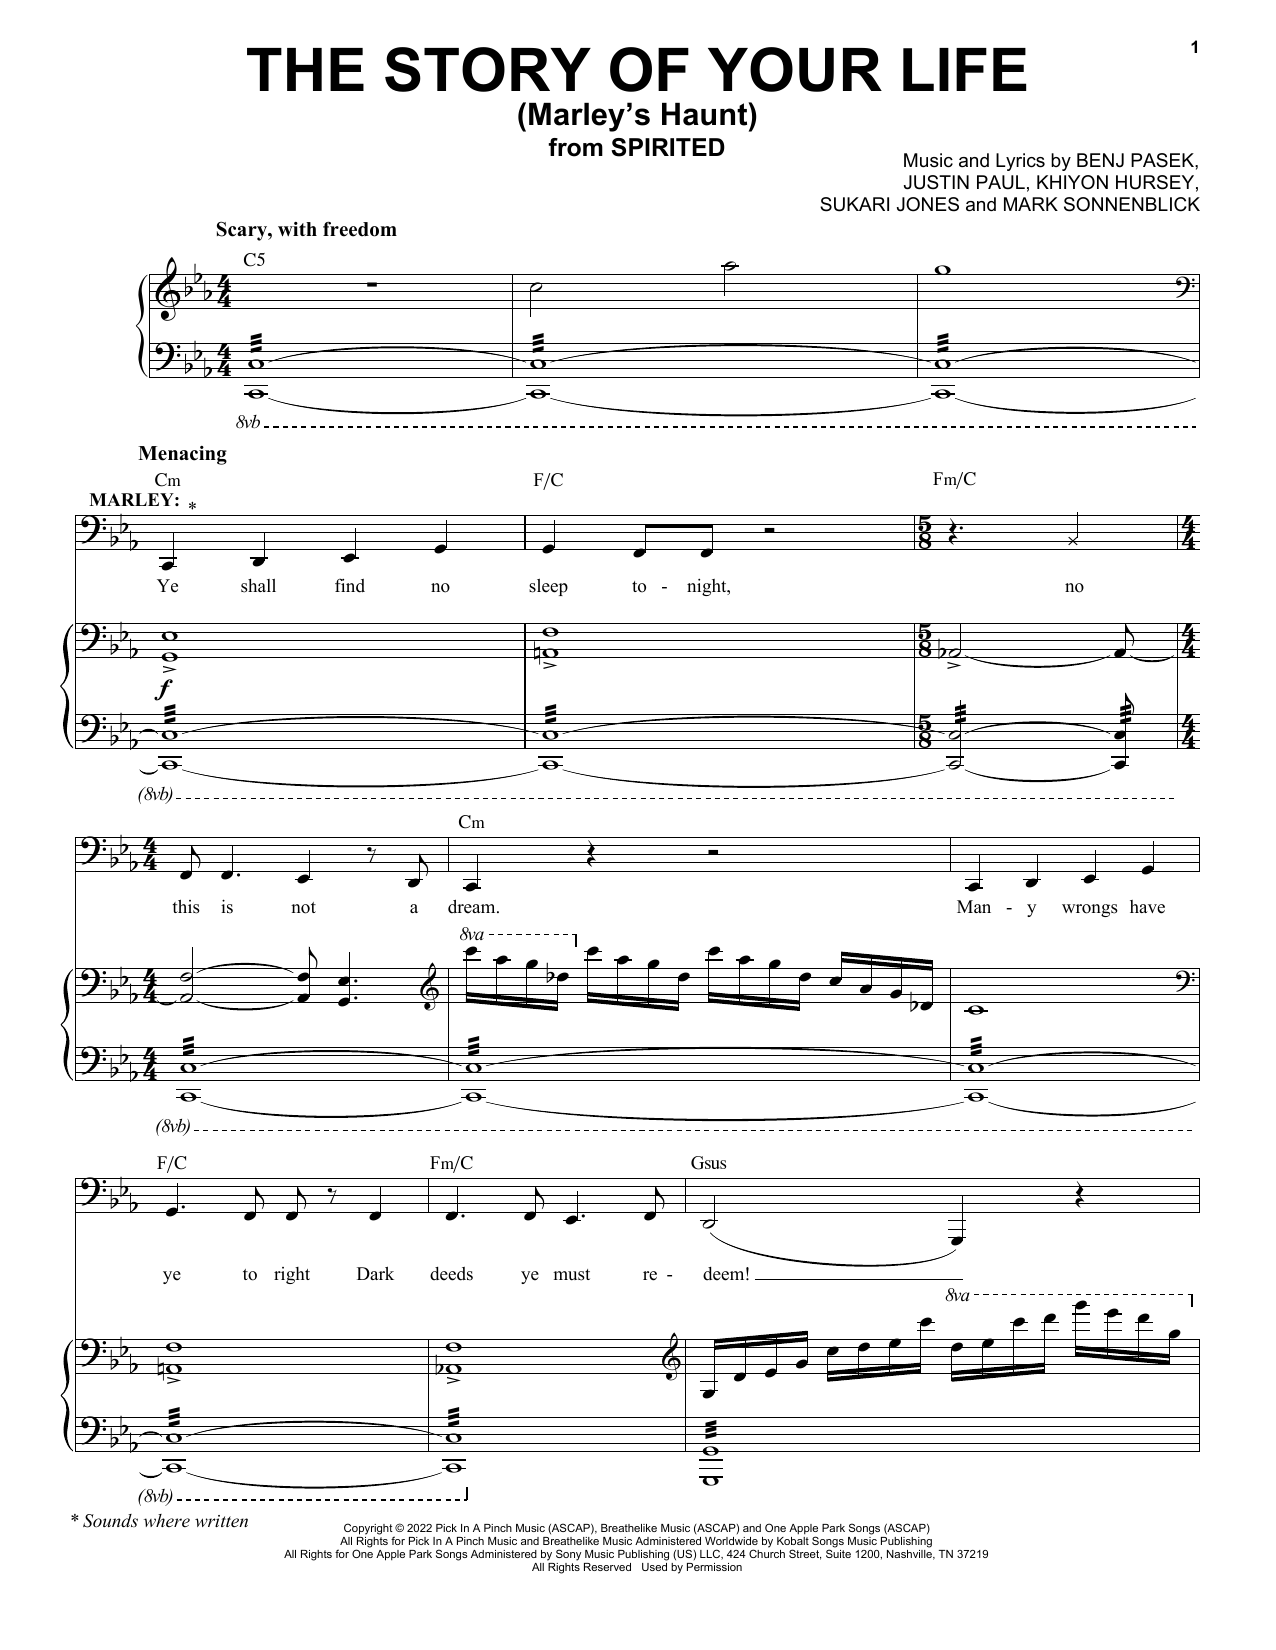 Download Pasek & Paul The Story Of Your Life (Marley's Haunt) Sheet Music